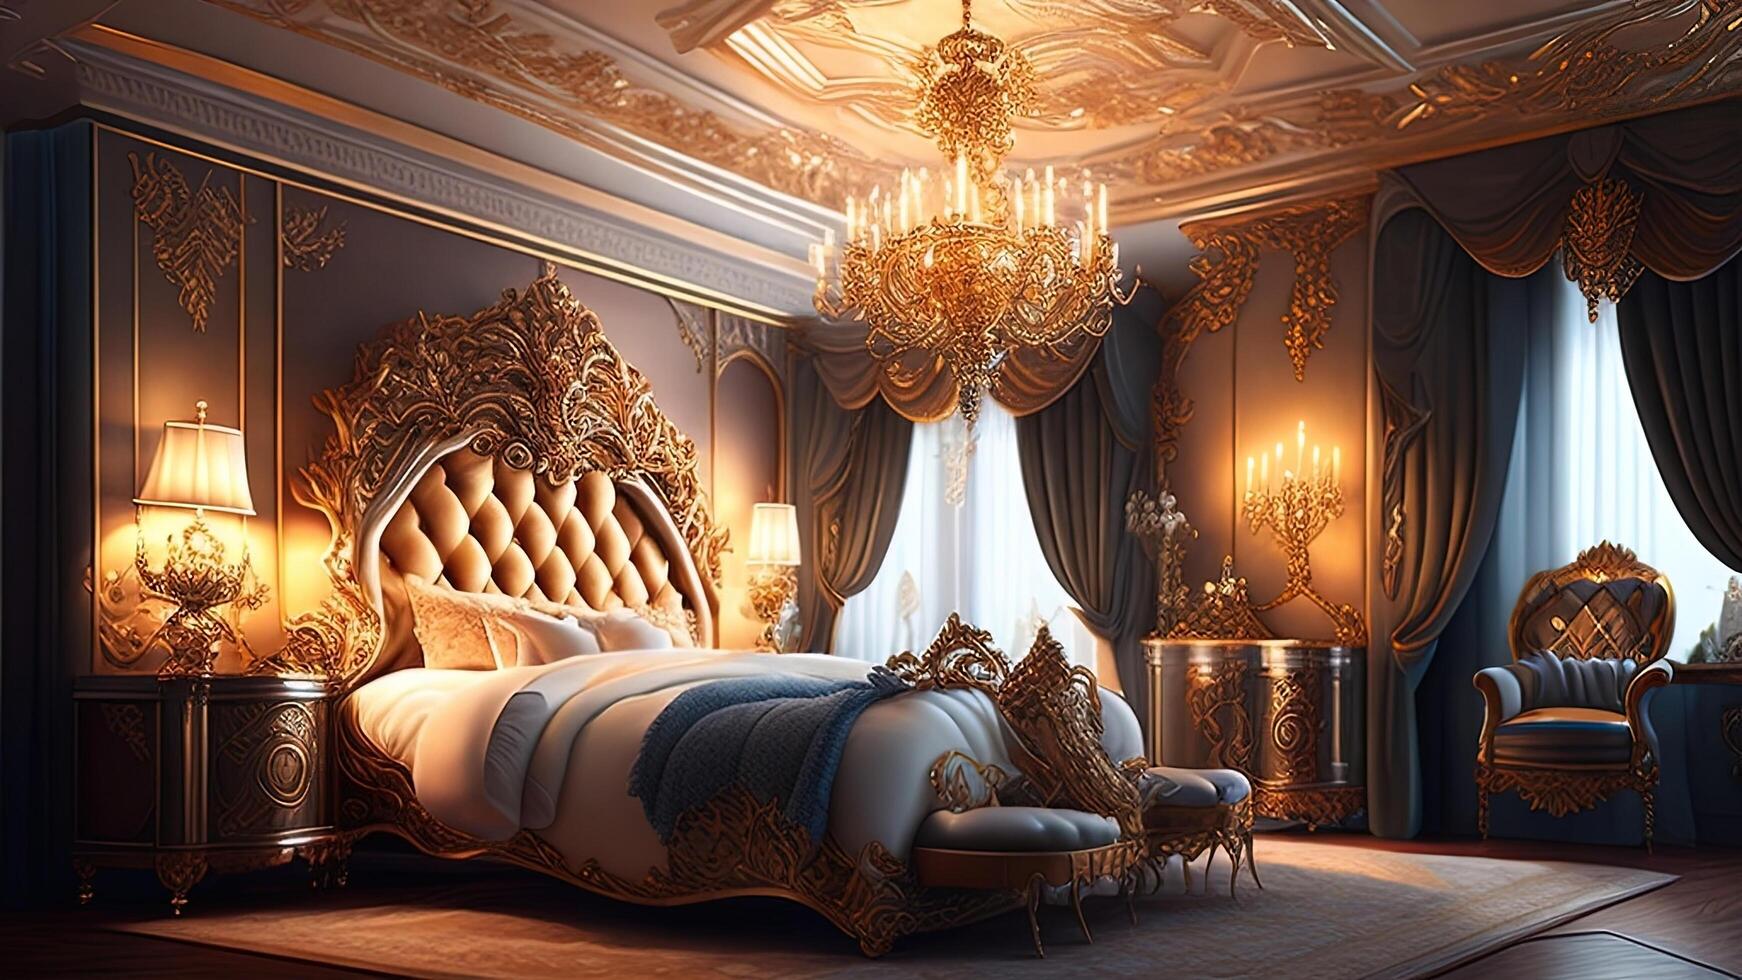 Luxury royal bedroom interior with golden walls, luxurious gold furniture and drapery. photo